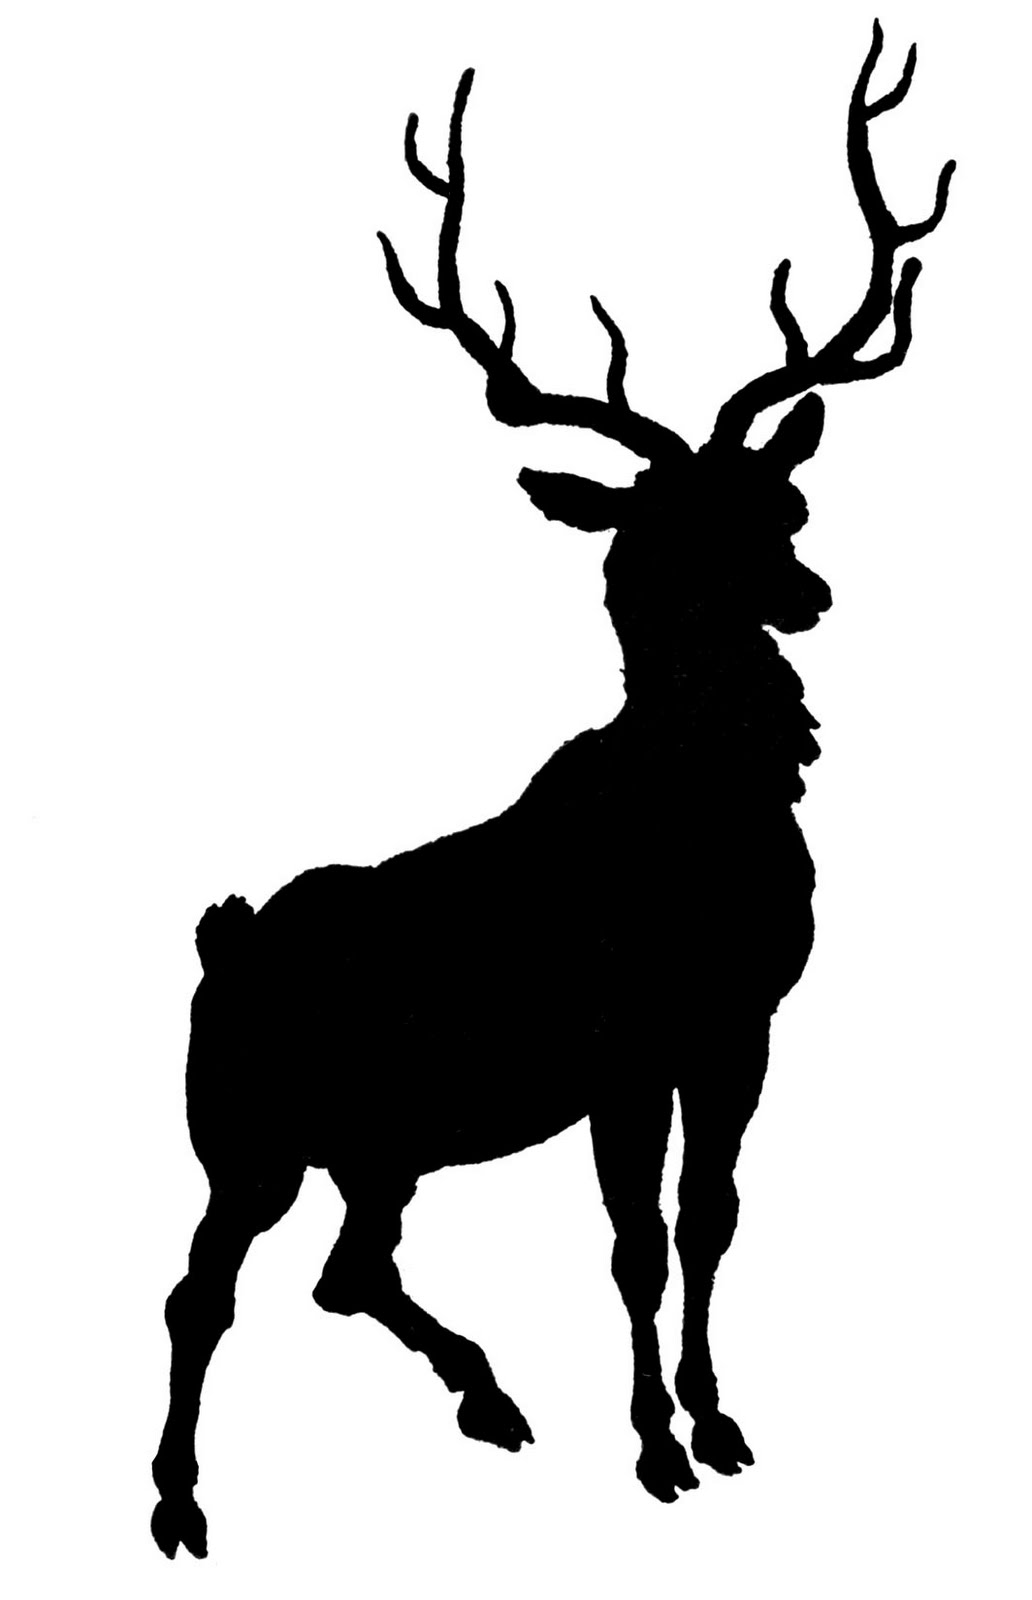 Vintage Deer With Antlers Silhouette The Graphics Clipart